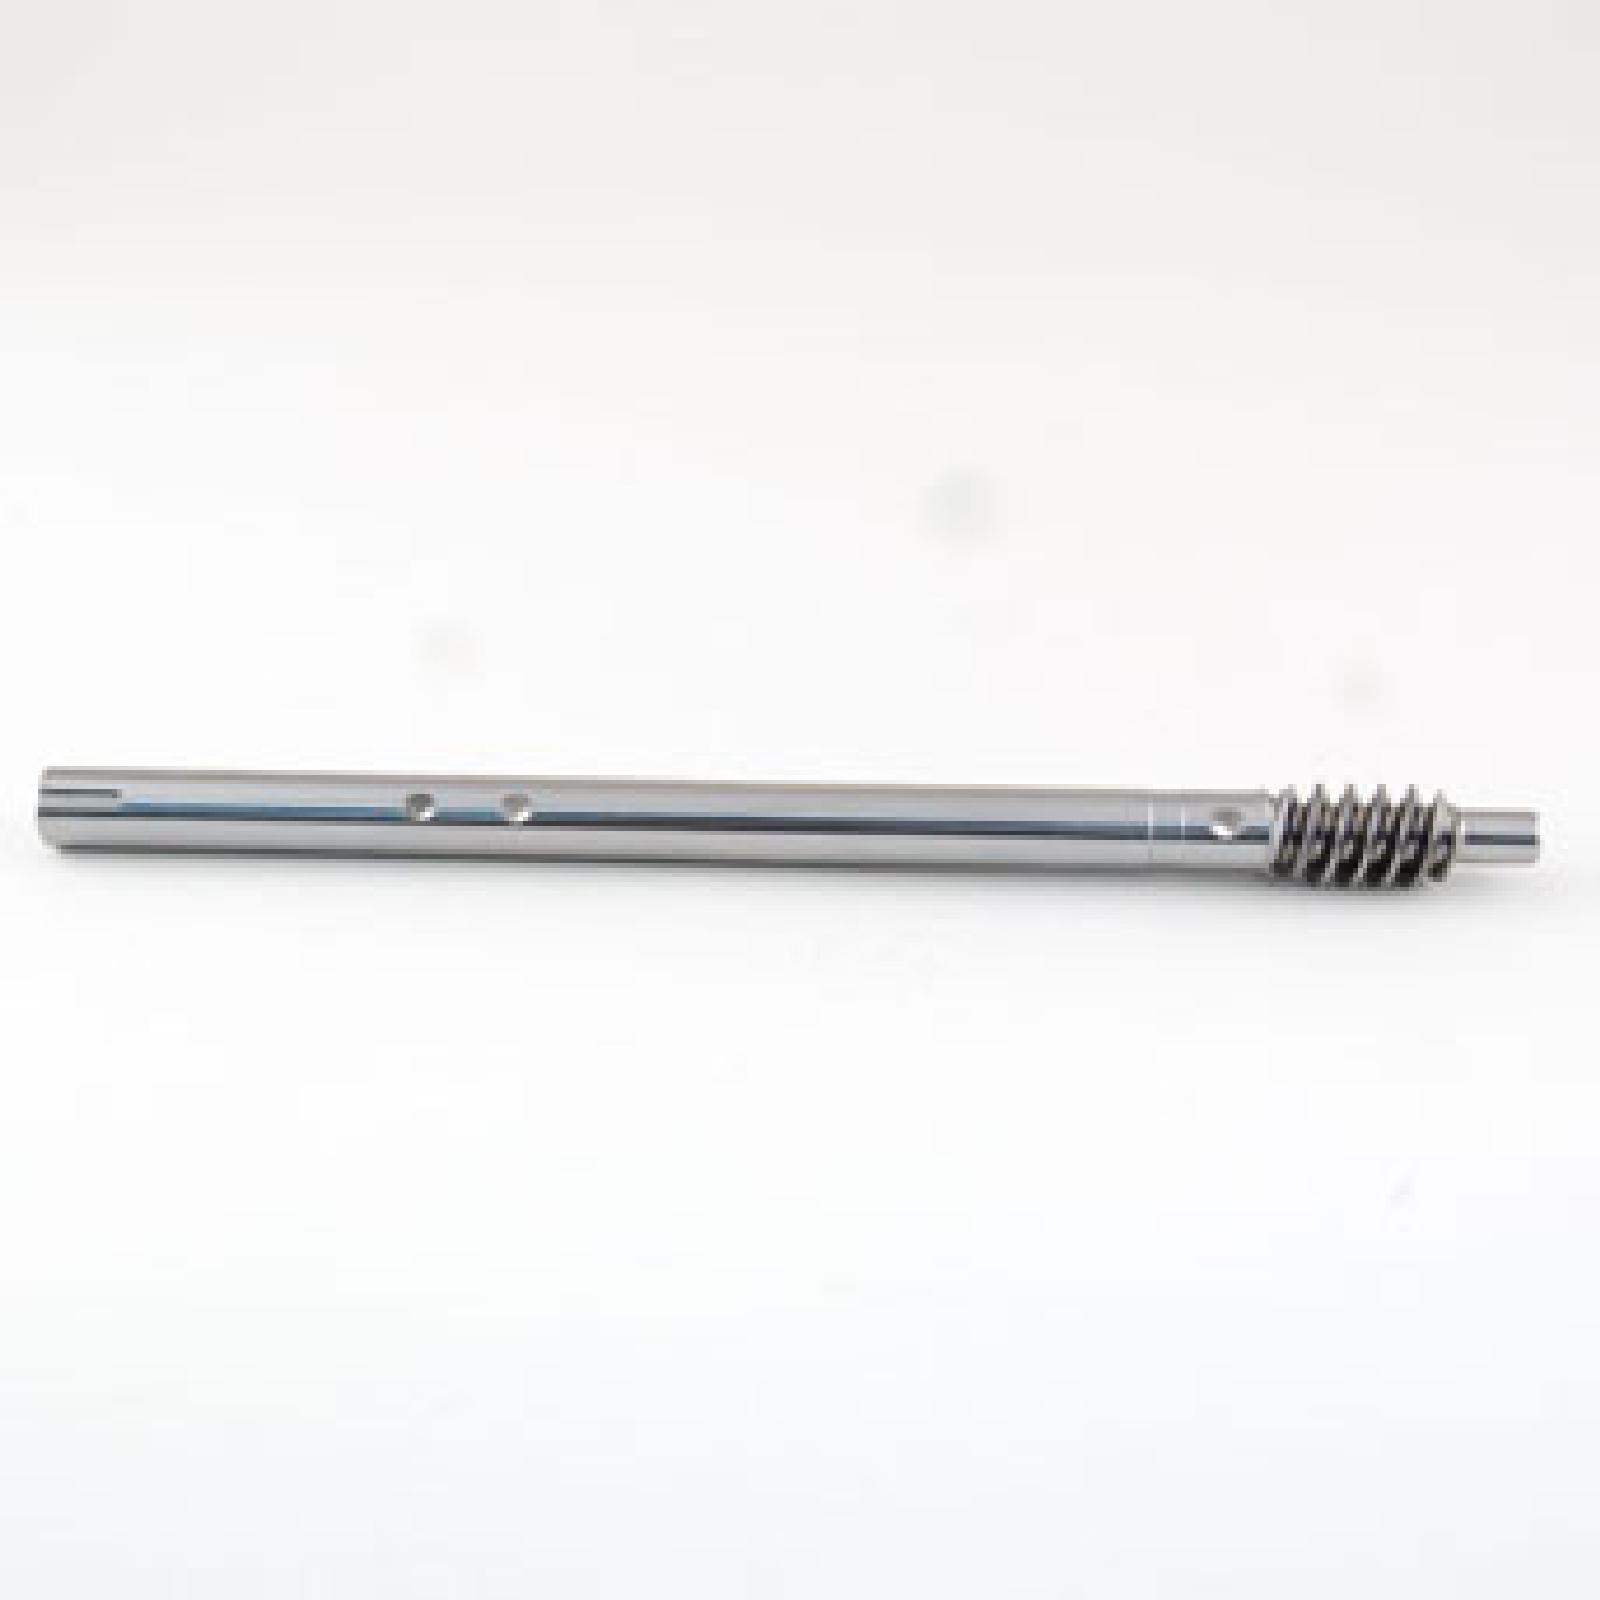 WORM SHAFT part# 717-3320 by MTD